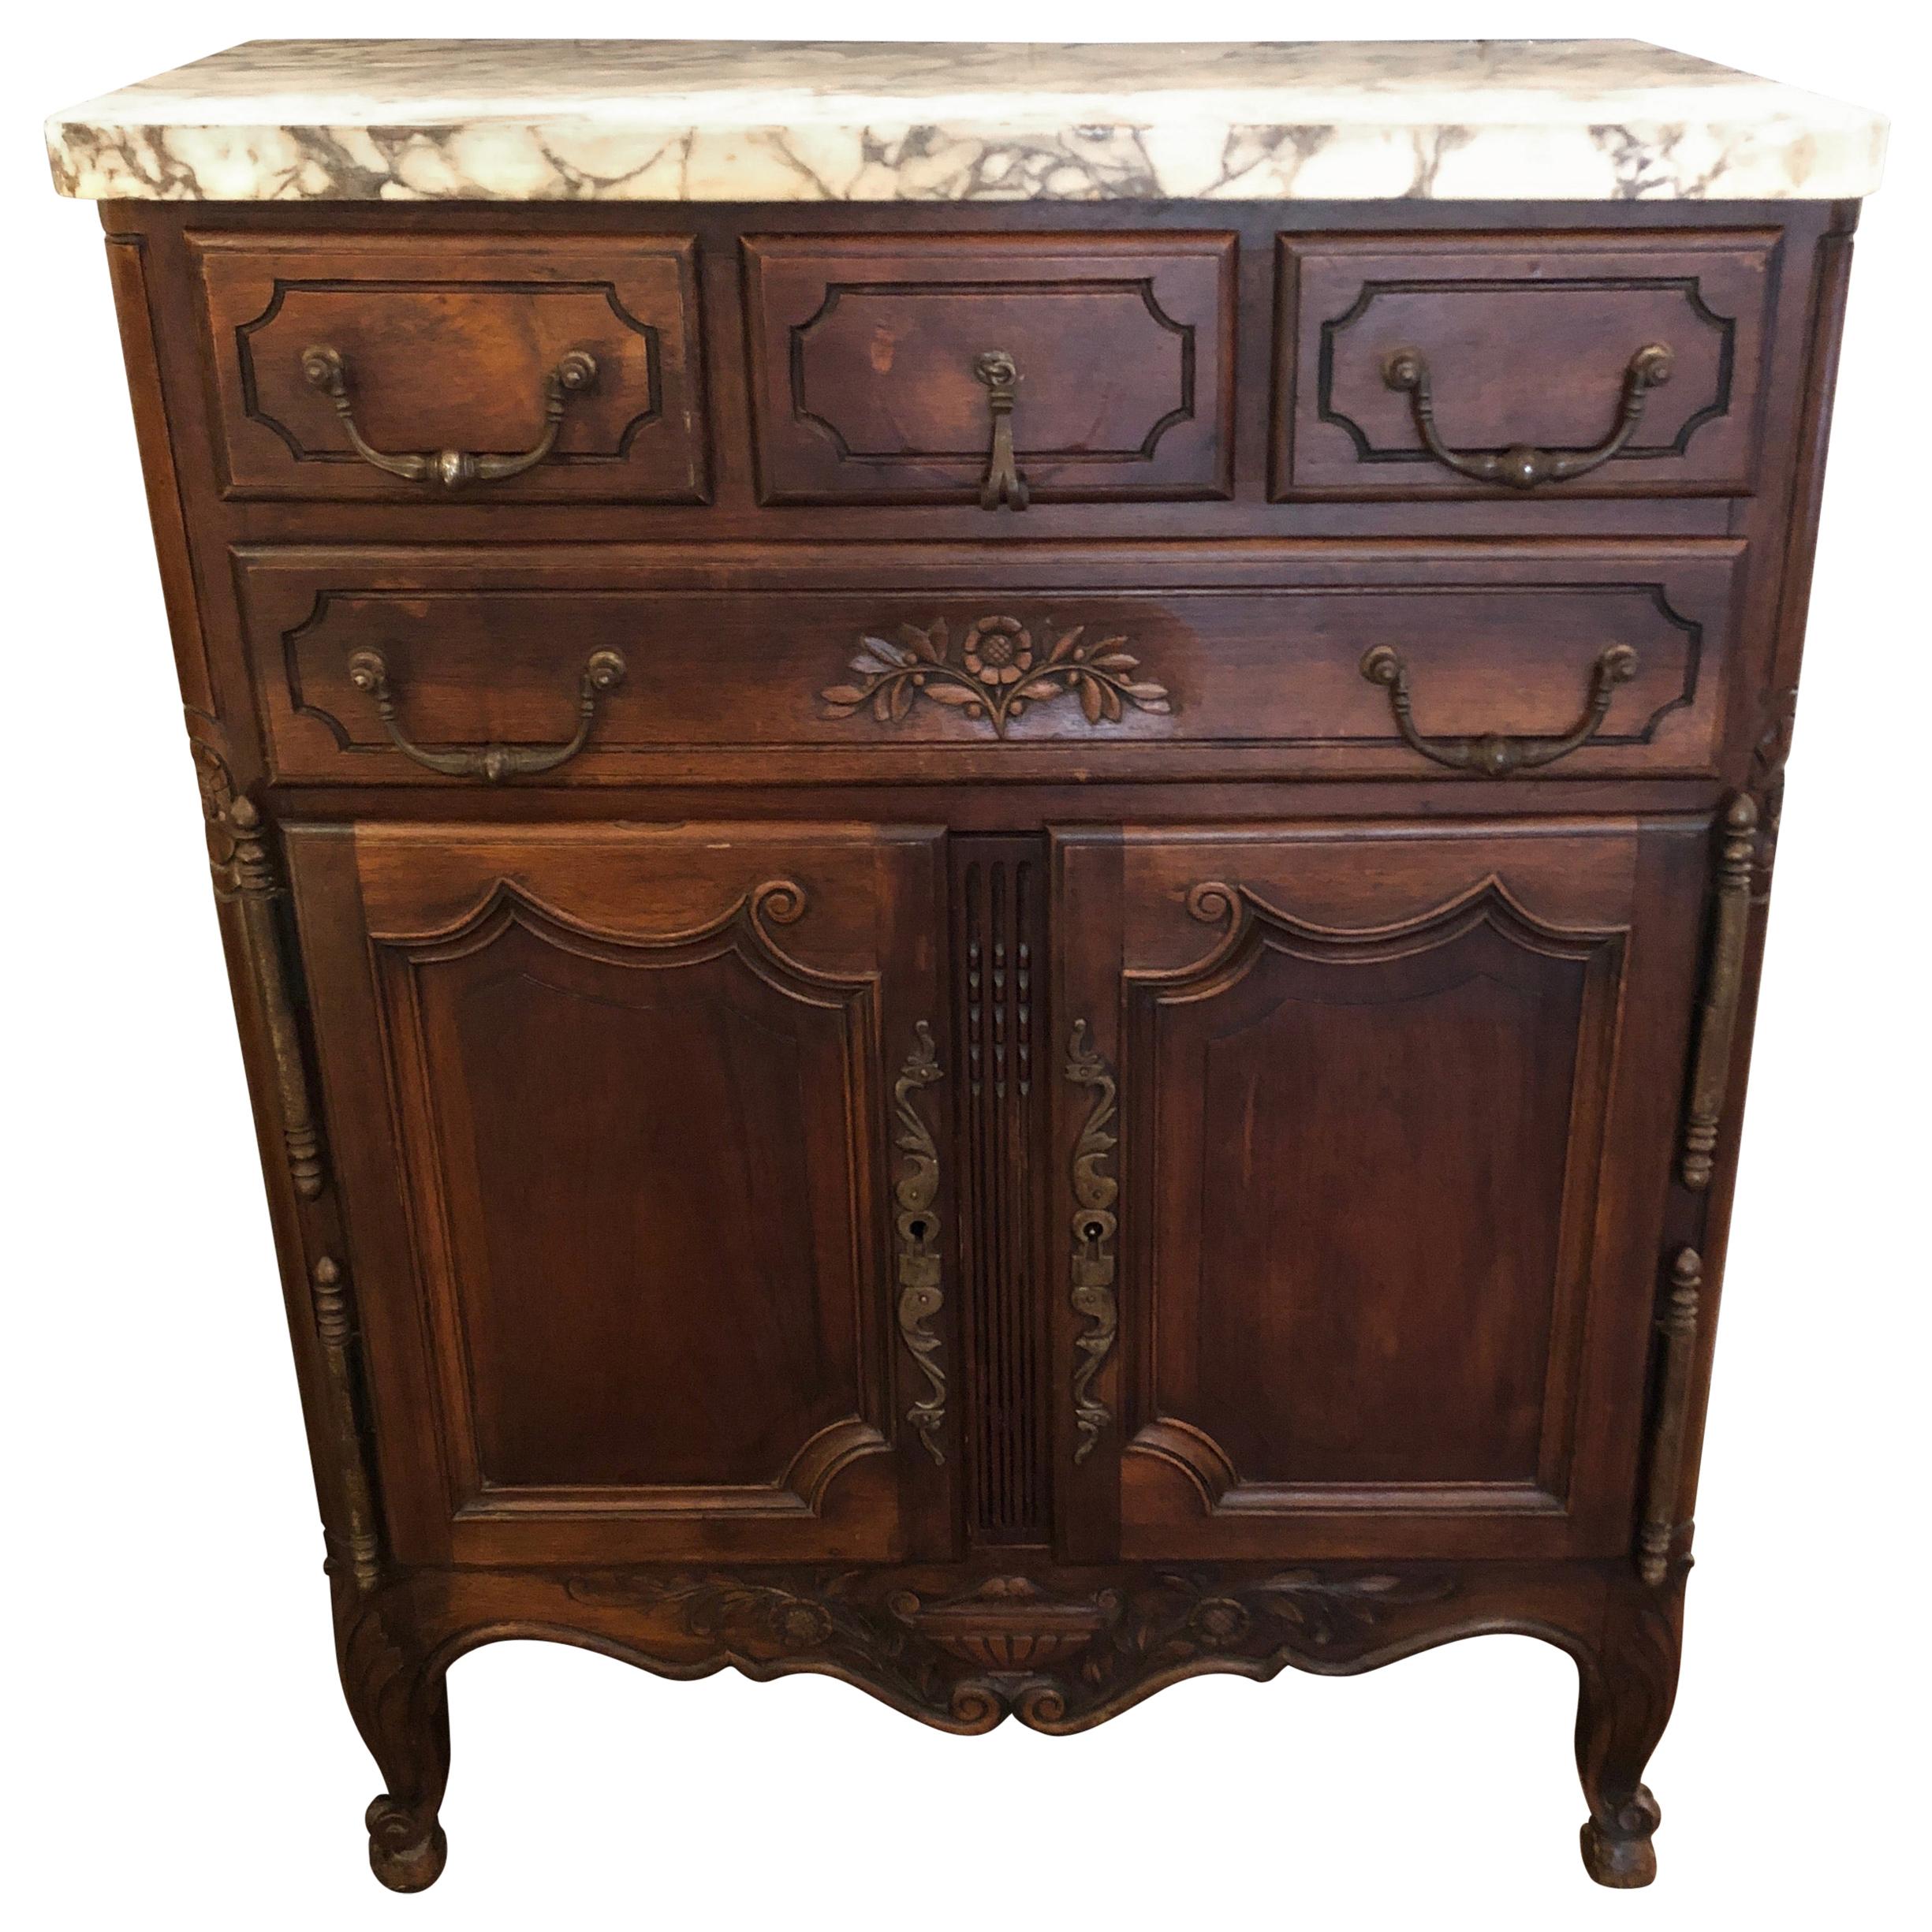 Charming French Provincial Marble-Top Carved Walnut Cabinet